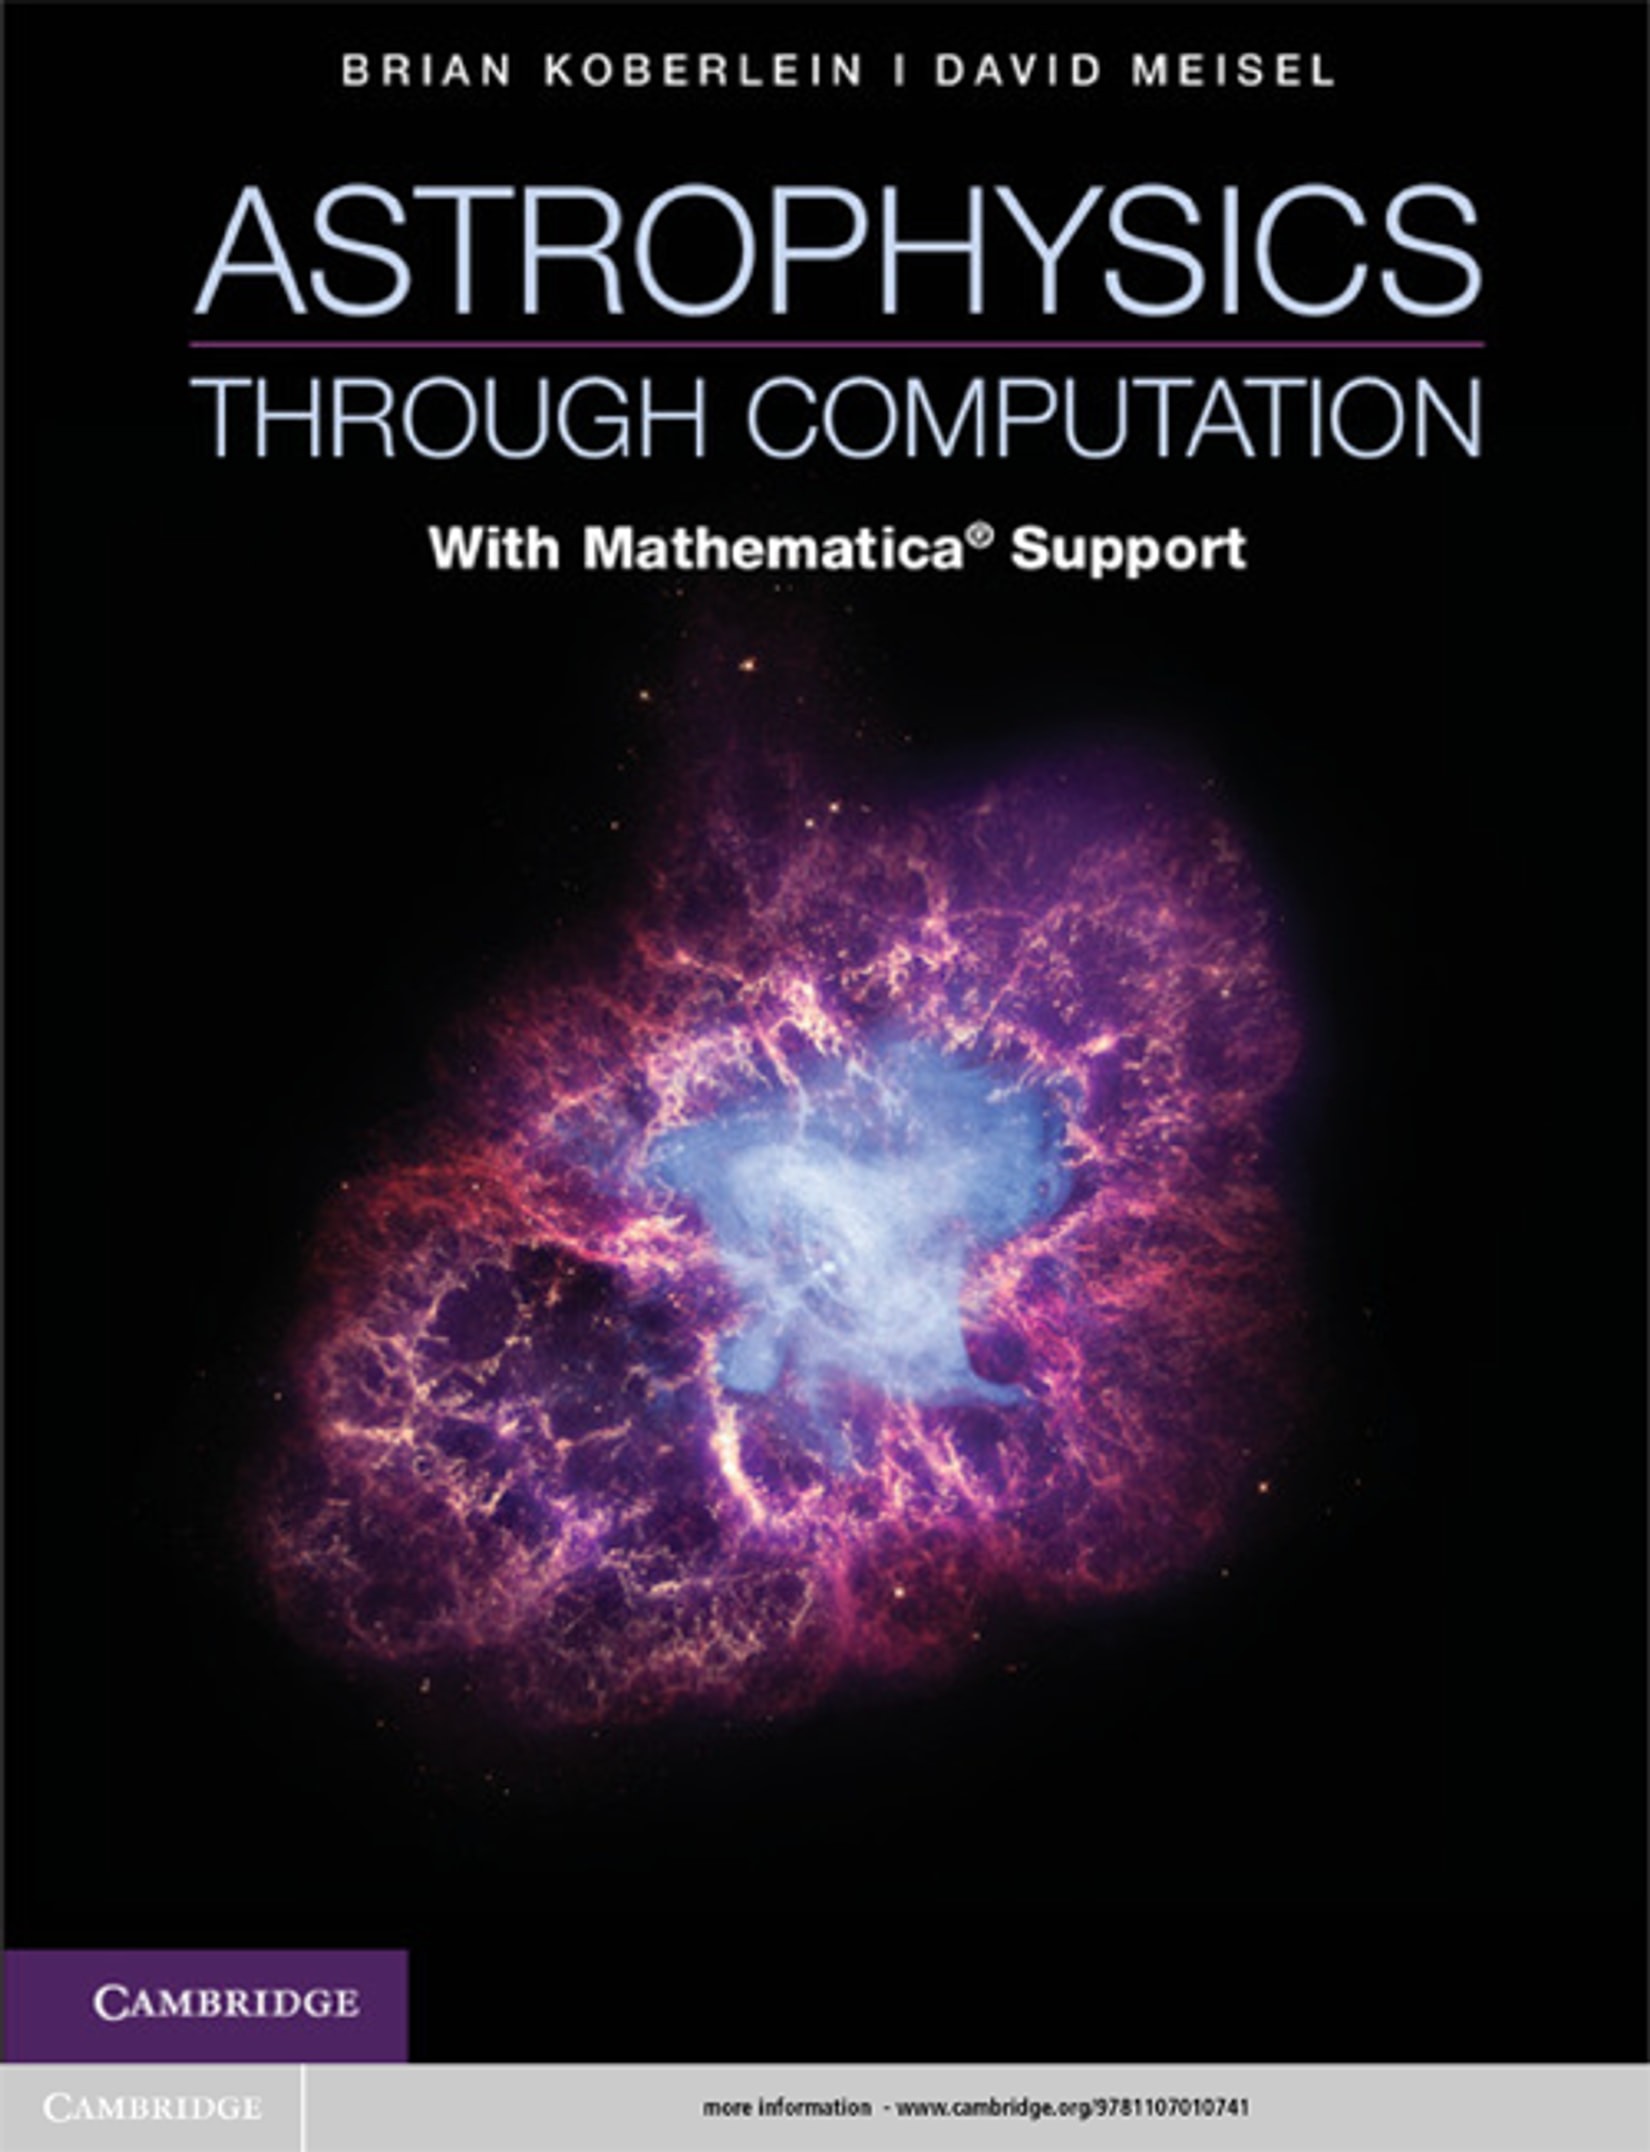 Astrophysics Through Computation: with Mathematica® Support